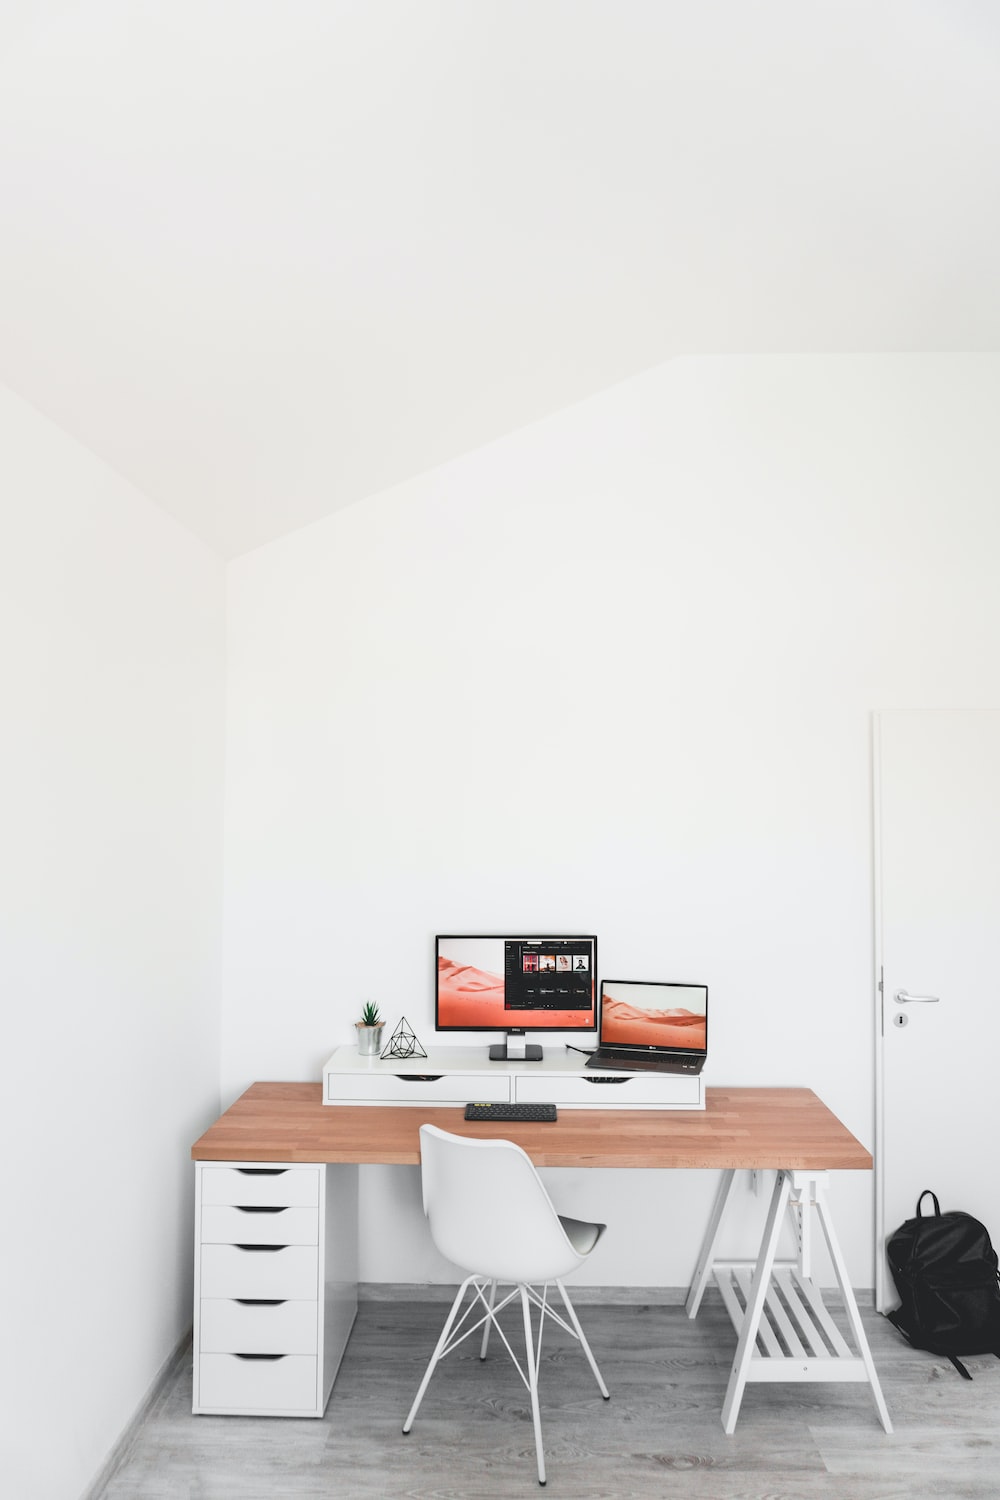 How do you build a pull down desk?